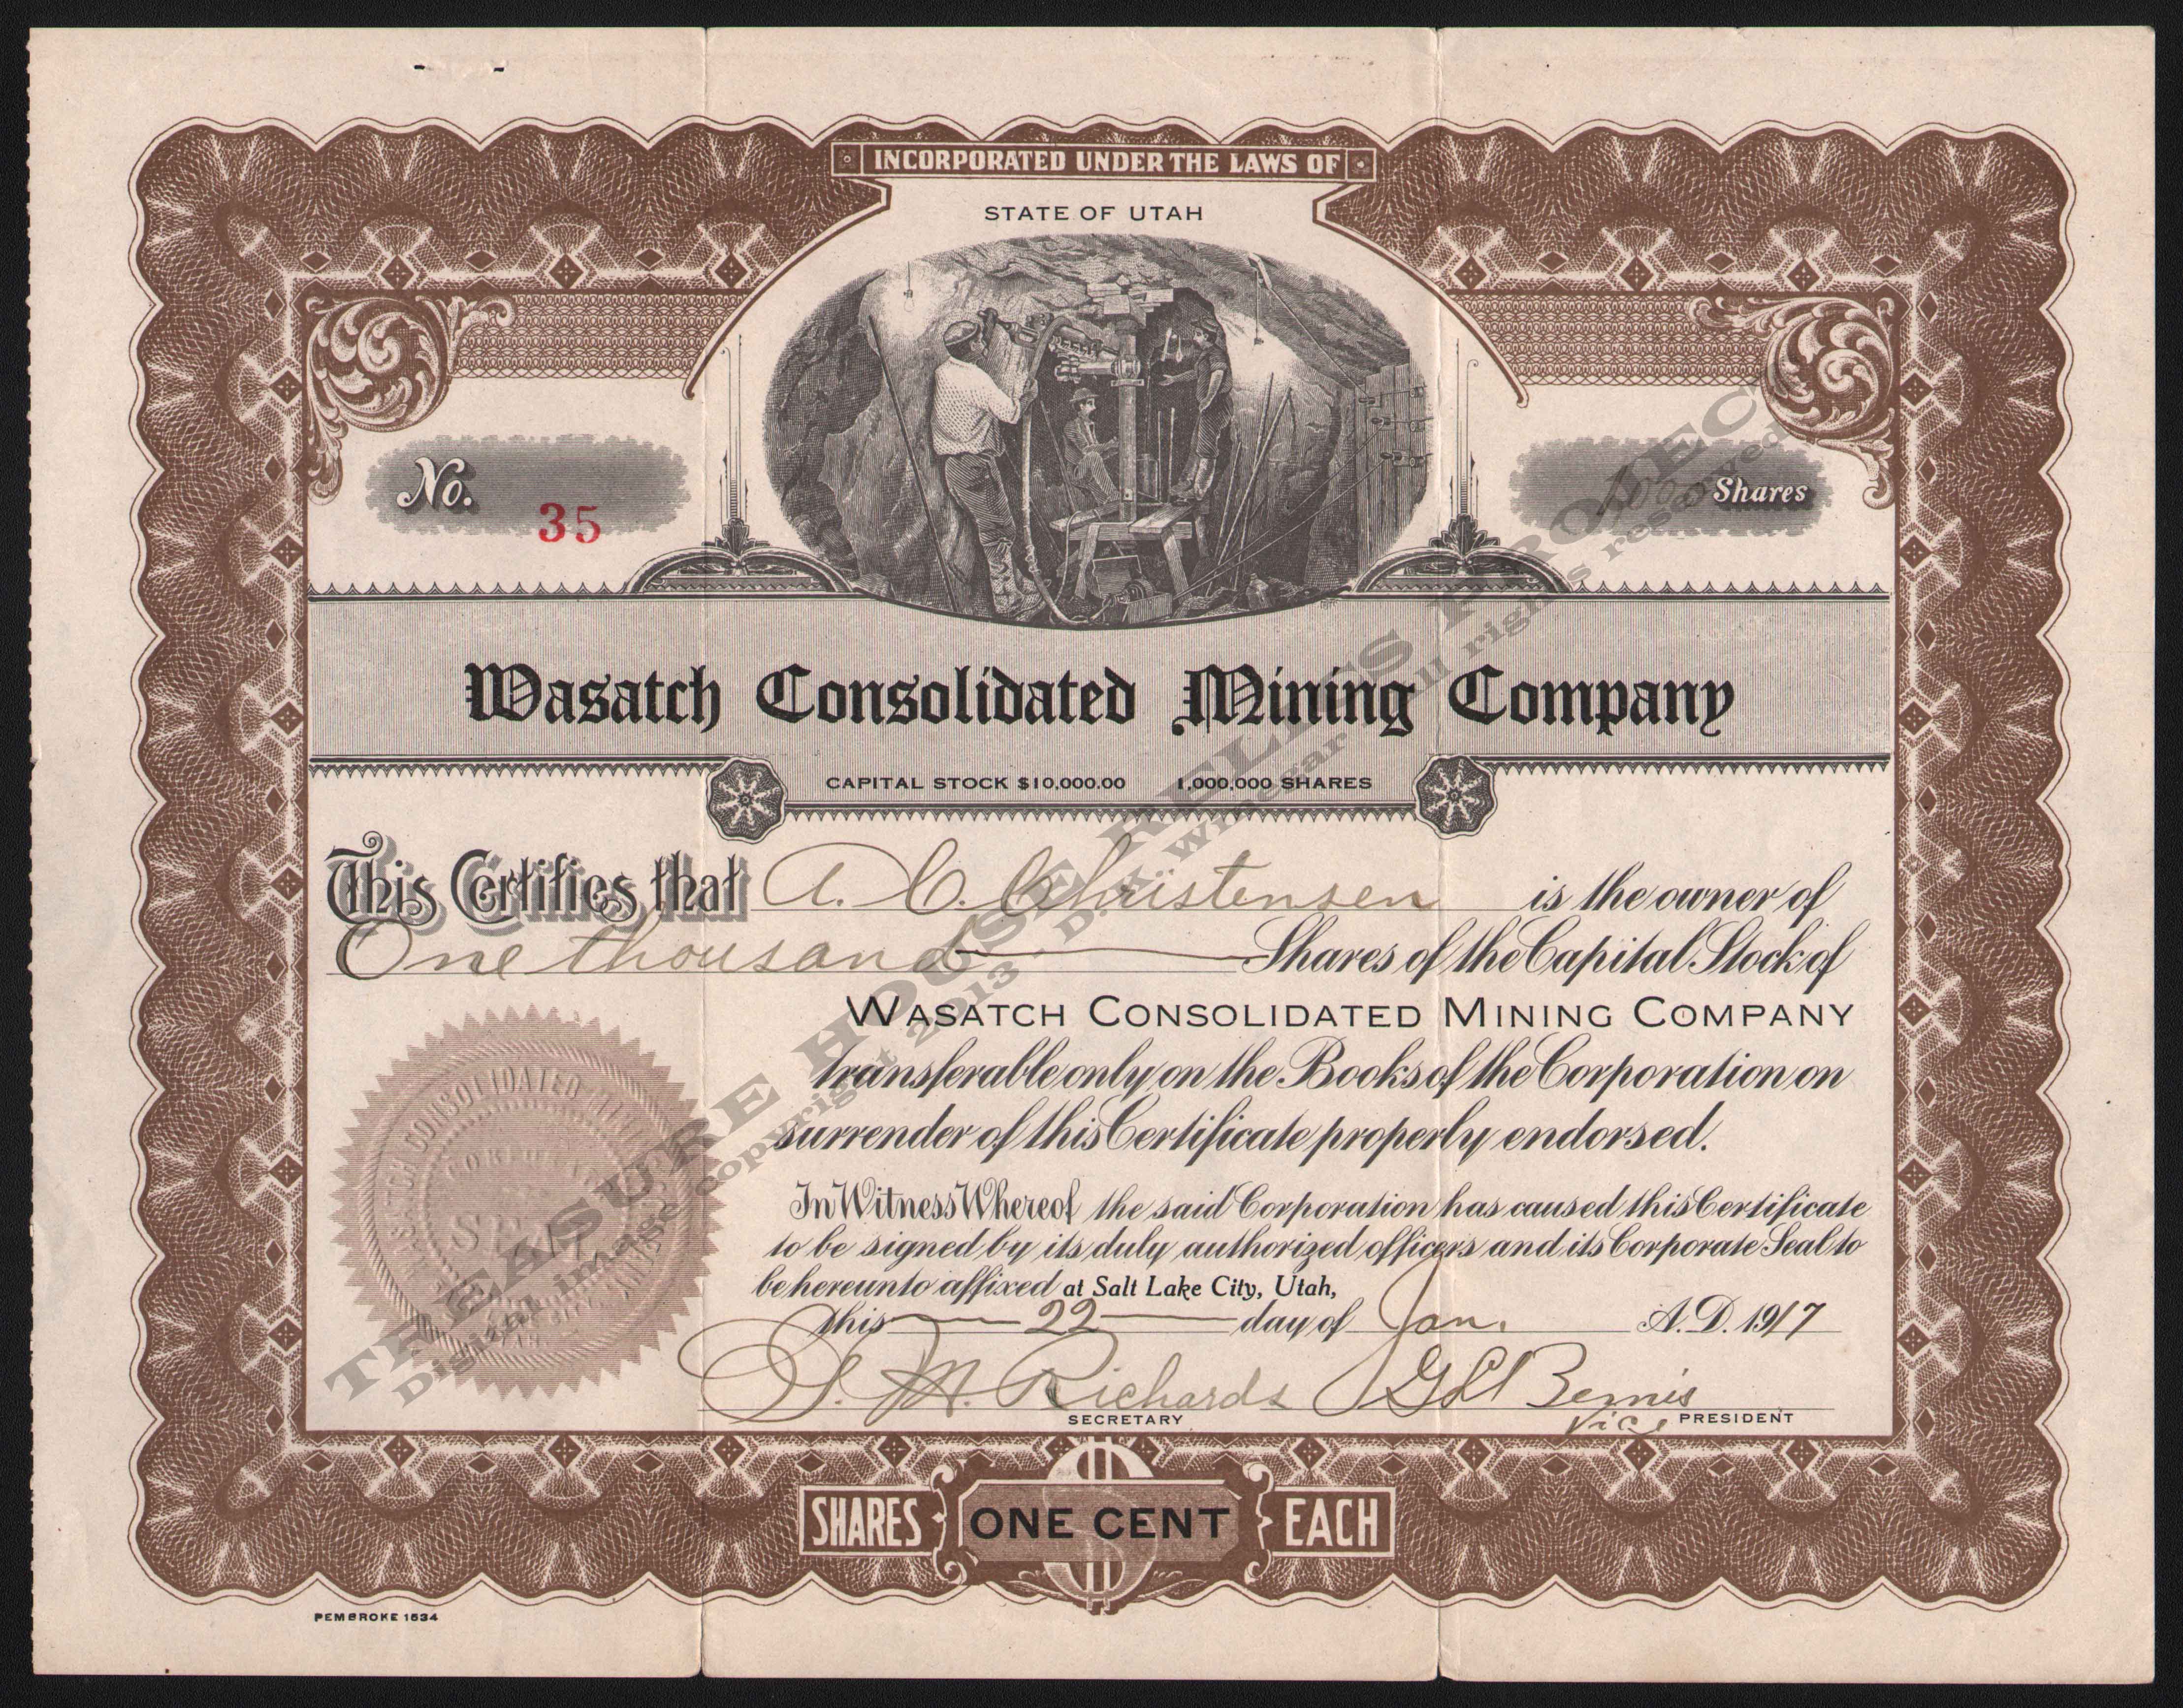 LETTERHEAD/STOCK_WASATCH_CONSOLIDATED_MINING_COMPANY_35_1917_DSW_400_CROP_EMBOSS.jpg